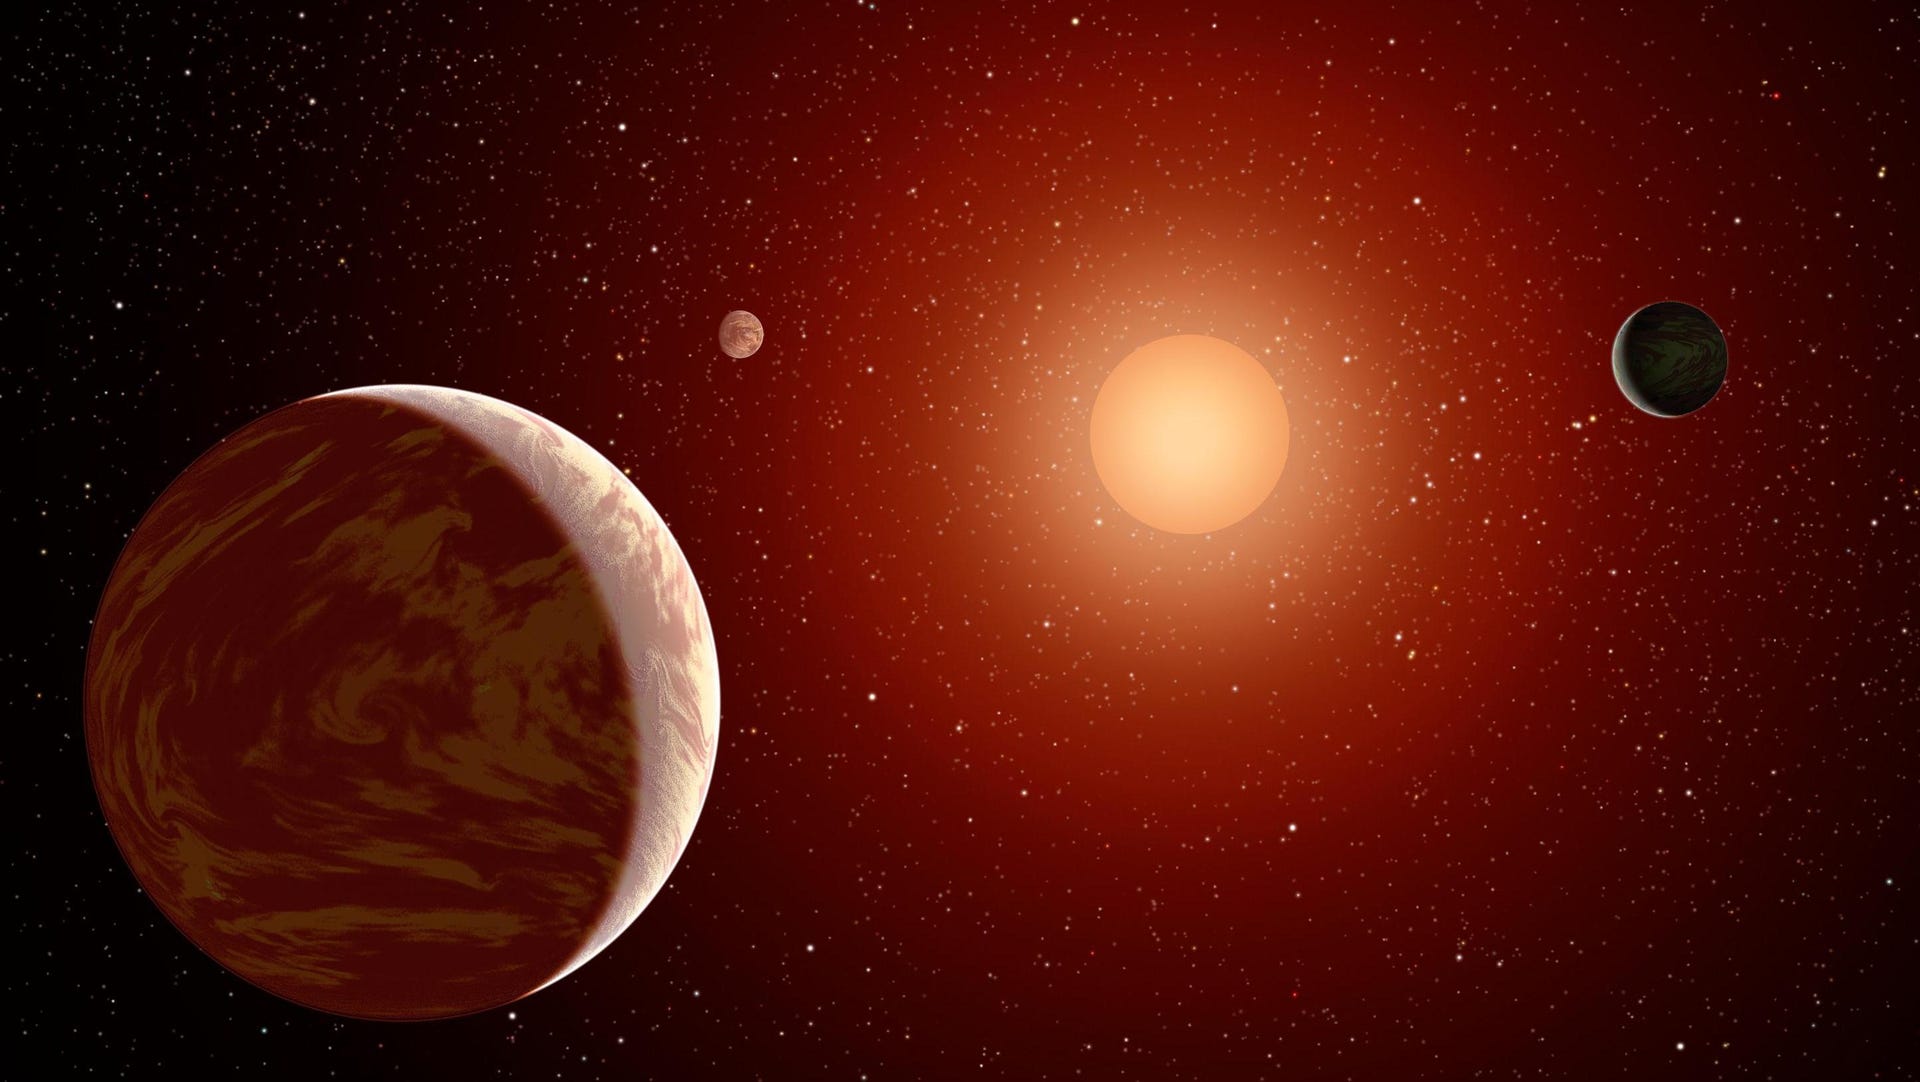 Illustration shows an M dwarf star shining dully orange with a swirly reddish planet in the foreground.